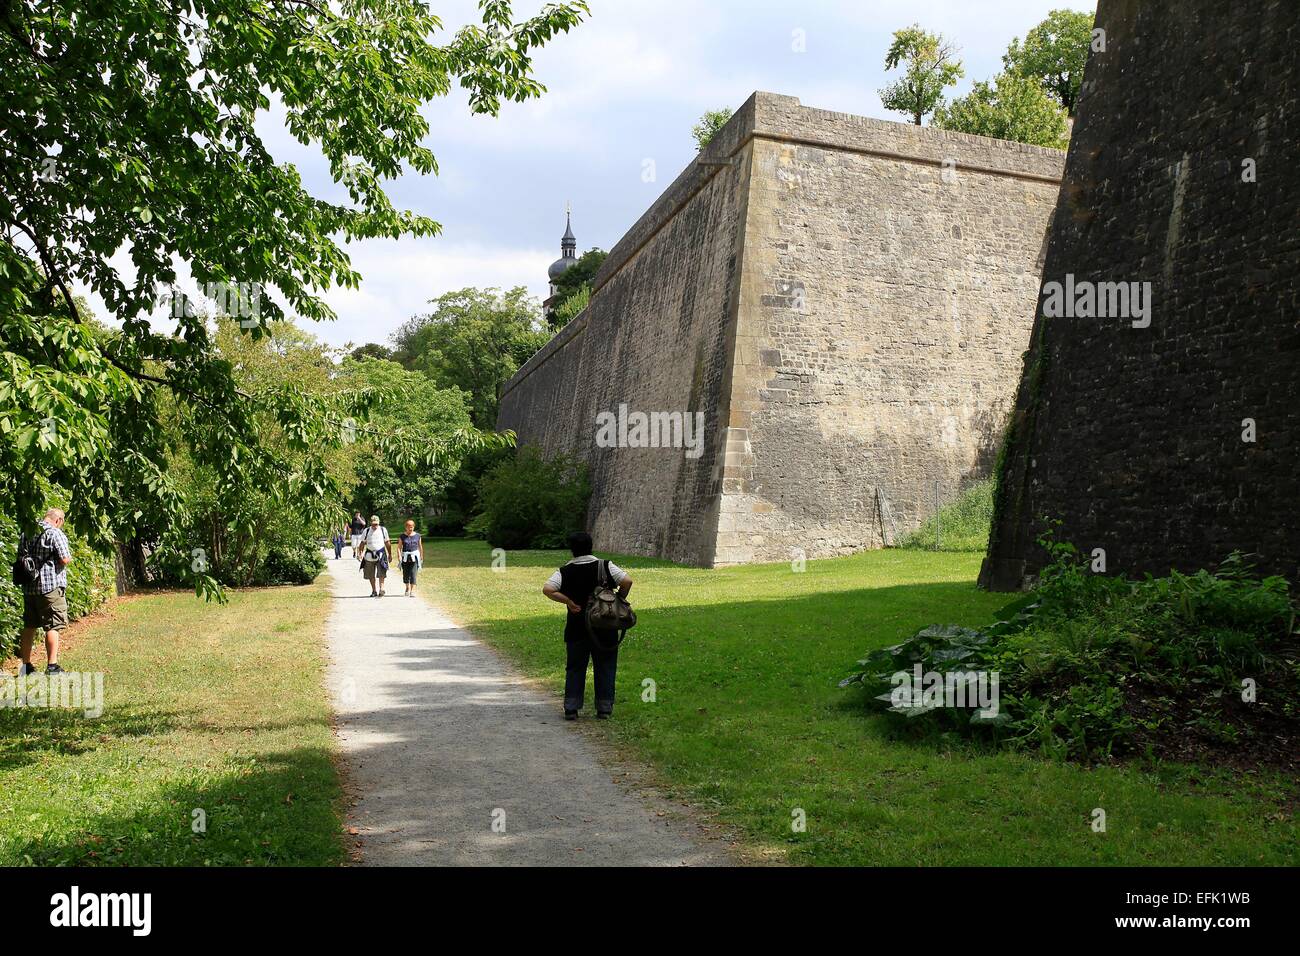 Fortifications of Marienberg Fortress in Wuerzburg. The fortress is surrounded by vineyards and overlooks the ancient university city with its domes, towers and bridges. Photo: Klaus Nowottnick Date: August 11, 2012 Stock Photo